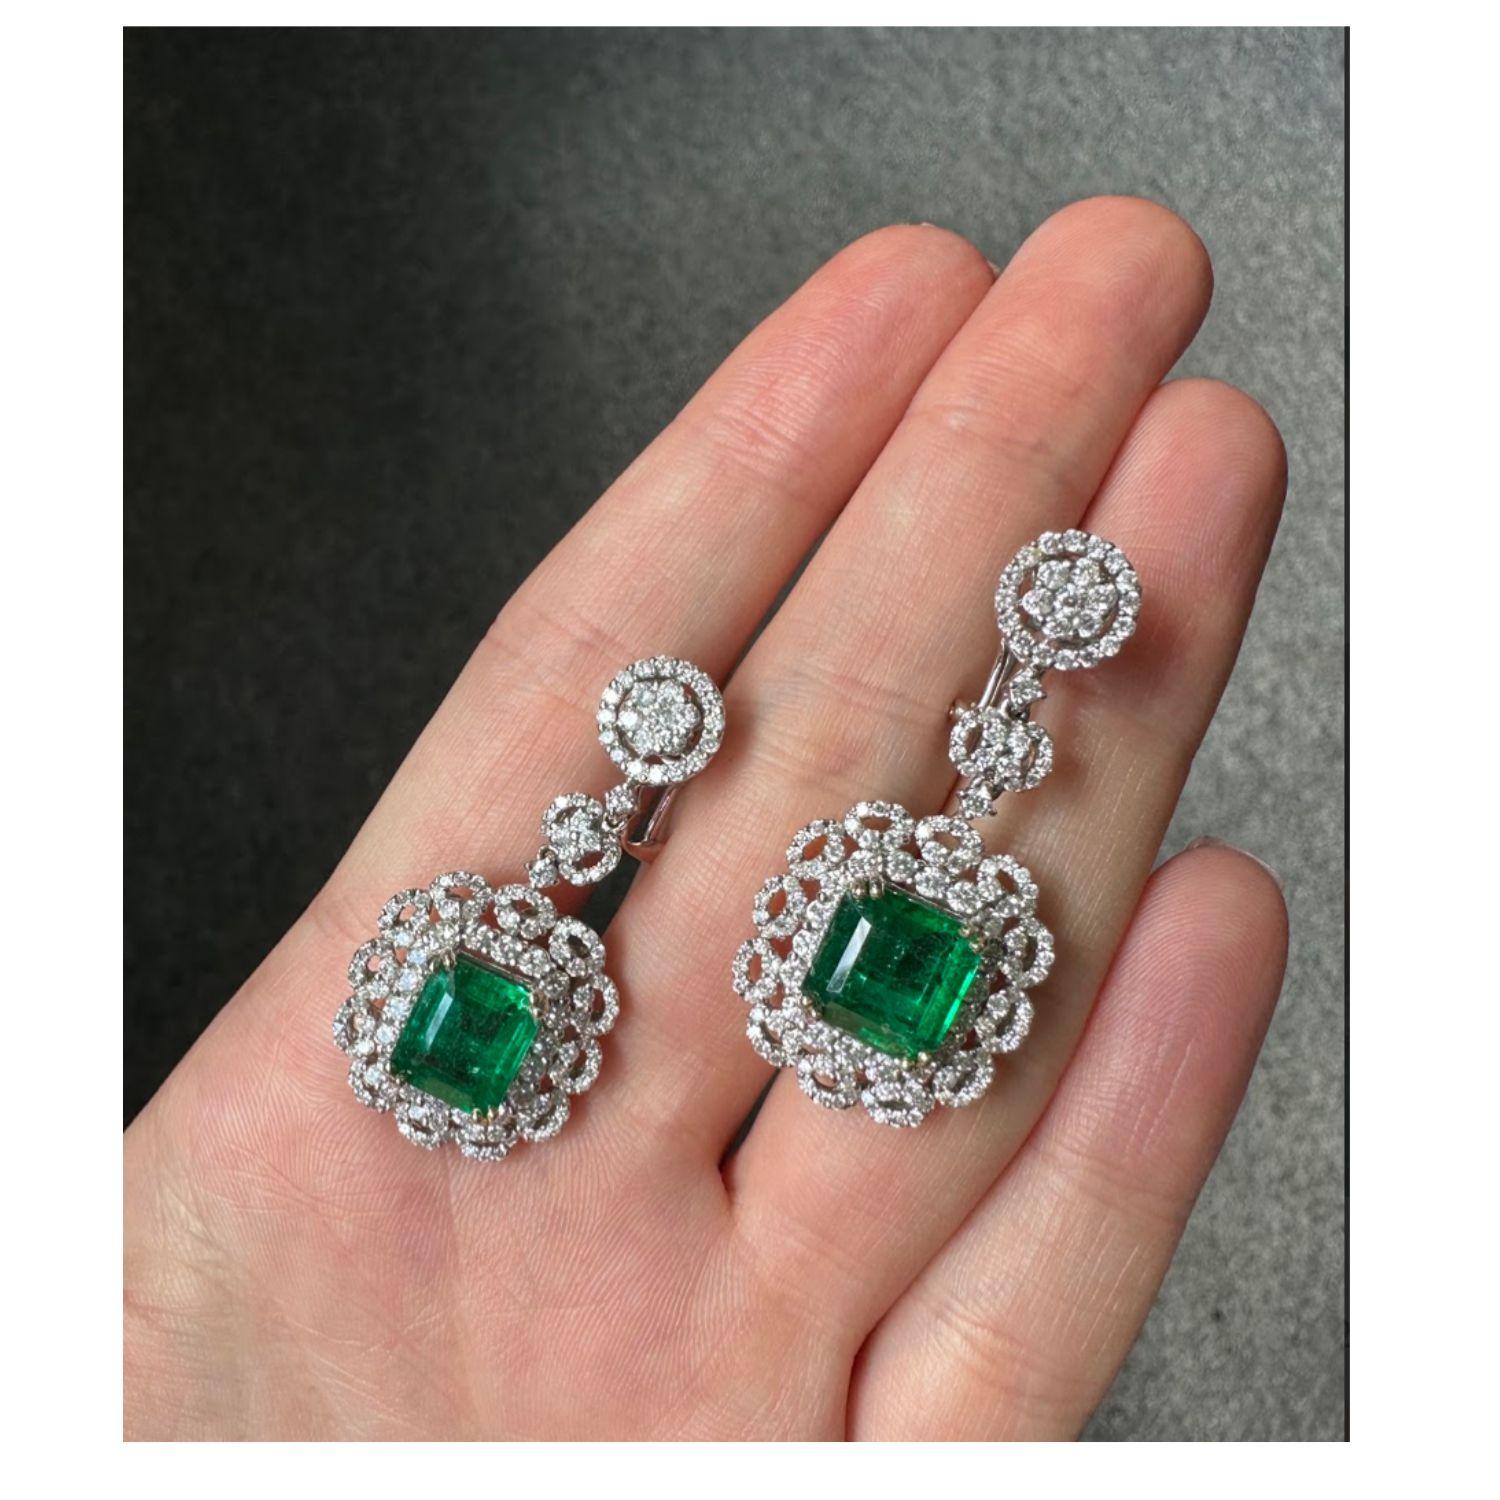 A stunning pair of natural Zambian Emeralds, set in an exquisite mount using 3.43 carat VS/SI F/G White Diamonds, all set in solid 18K White Gold. Comes with omega clips. 